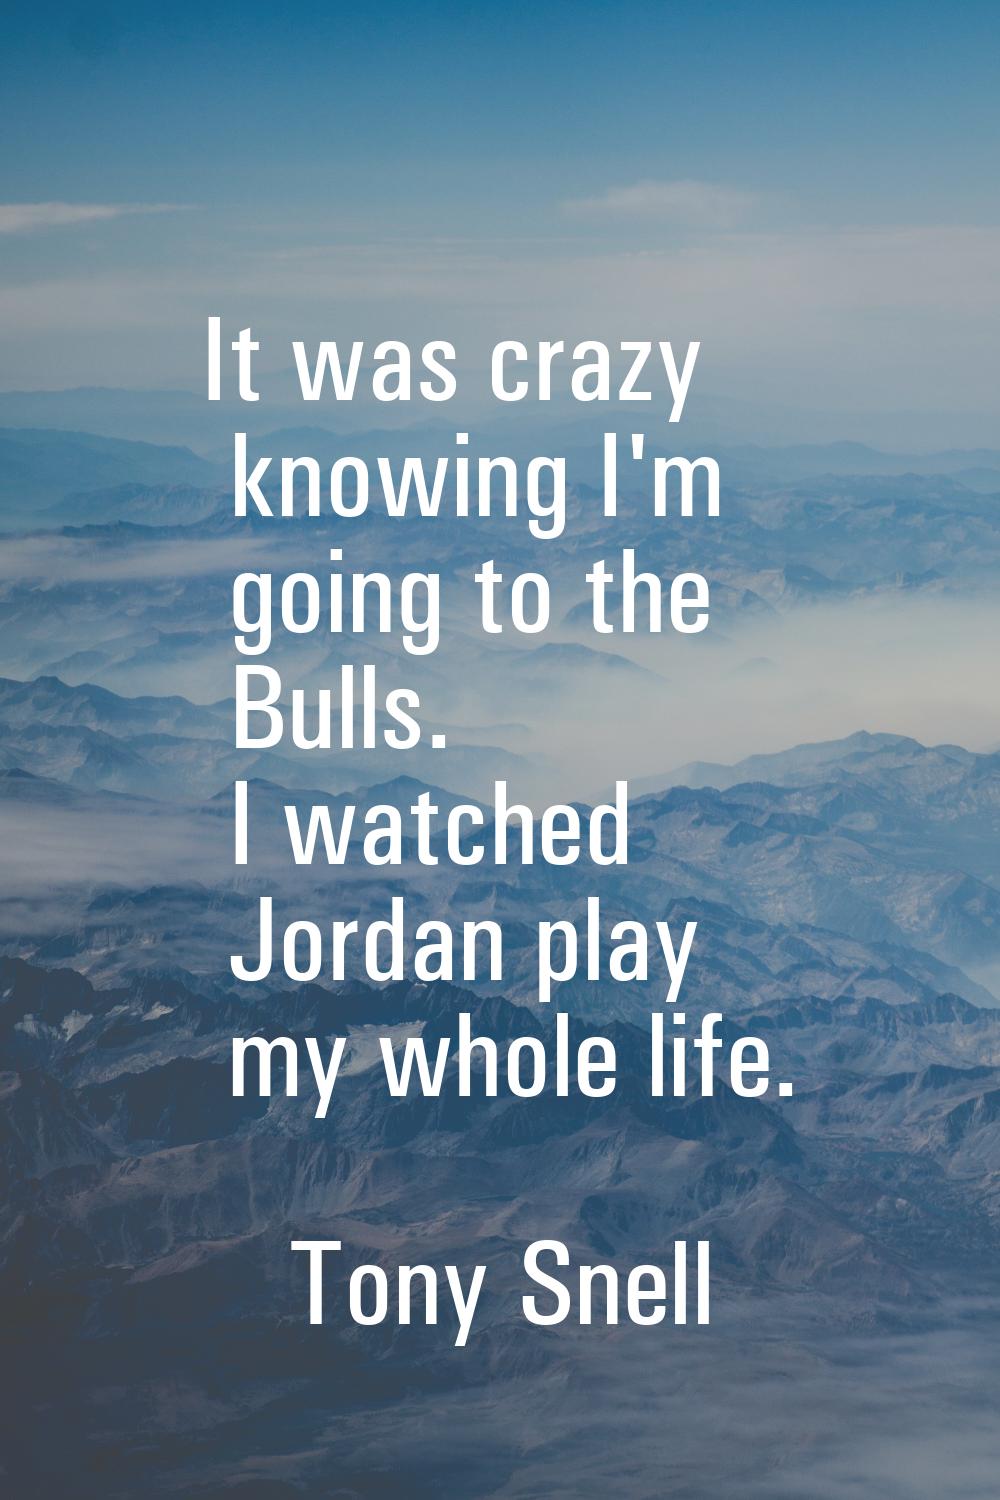 It was crazy knowing I'm going to the Bulls. I watched Jordan play my whole life.